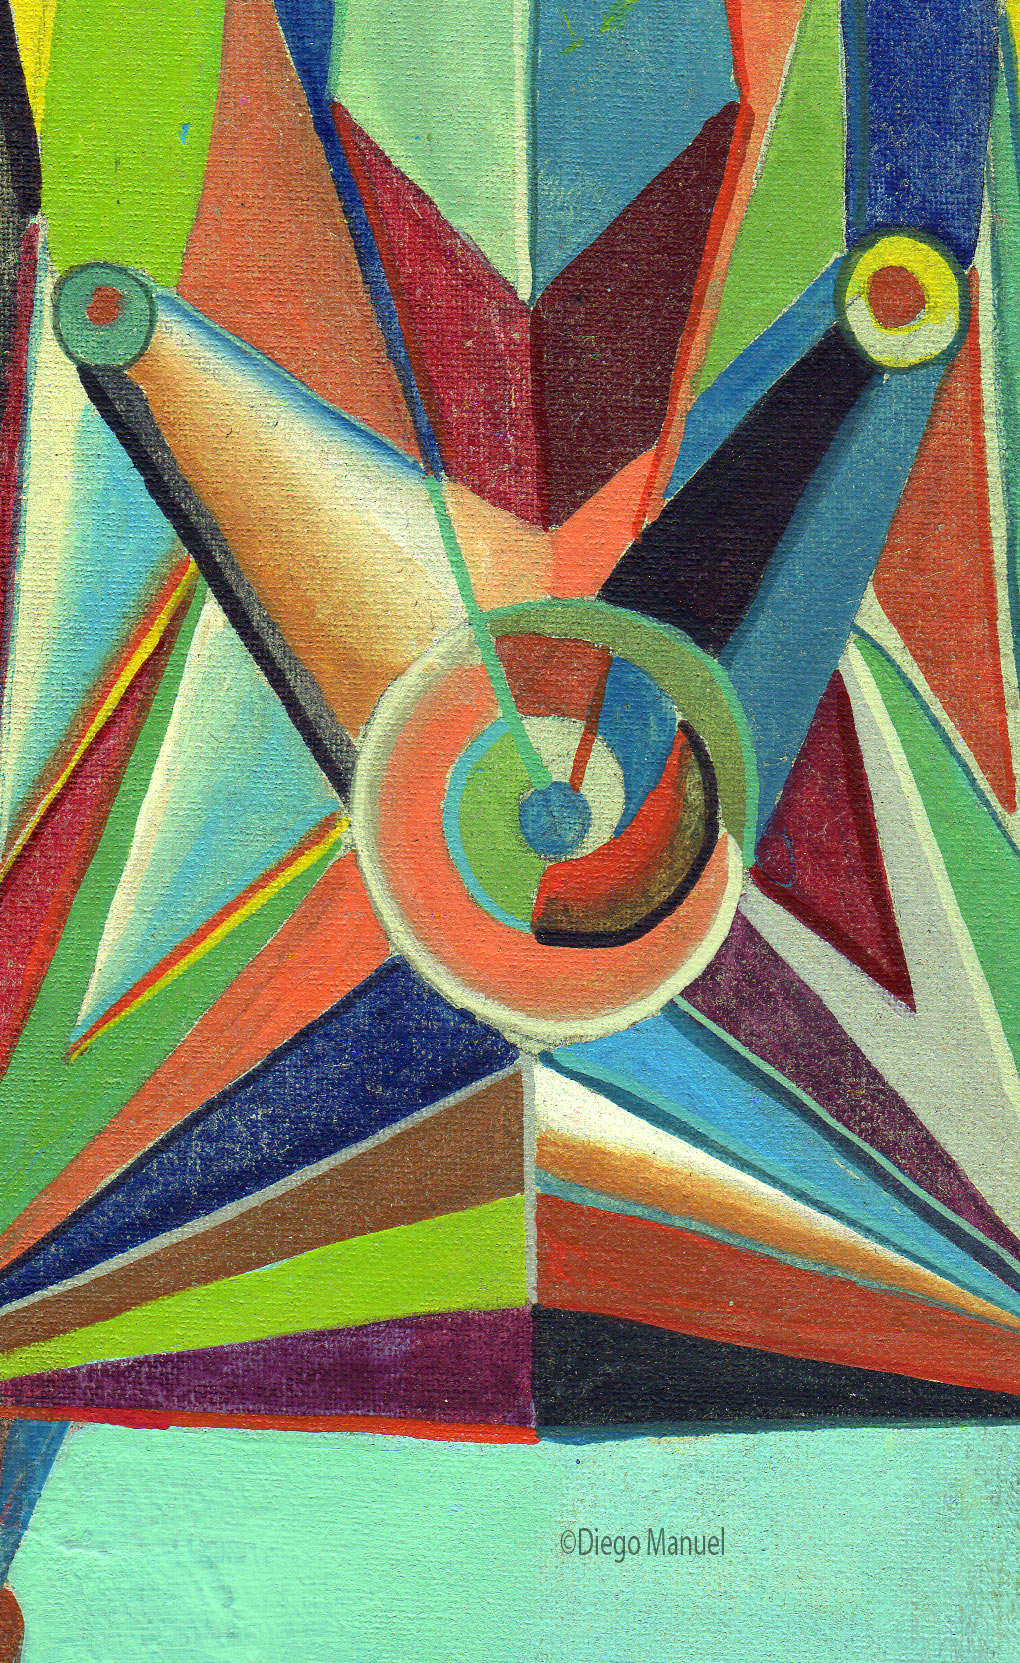 Astrapop 23, acrlico sobre tela, 27,5 x 17 cm. 2015. Abstract colorful painting